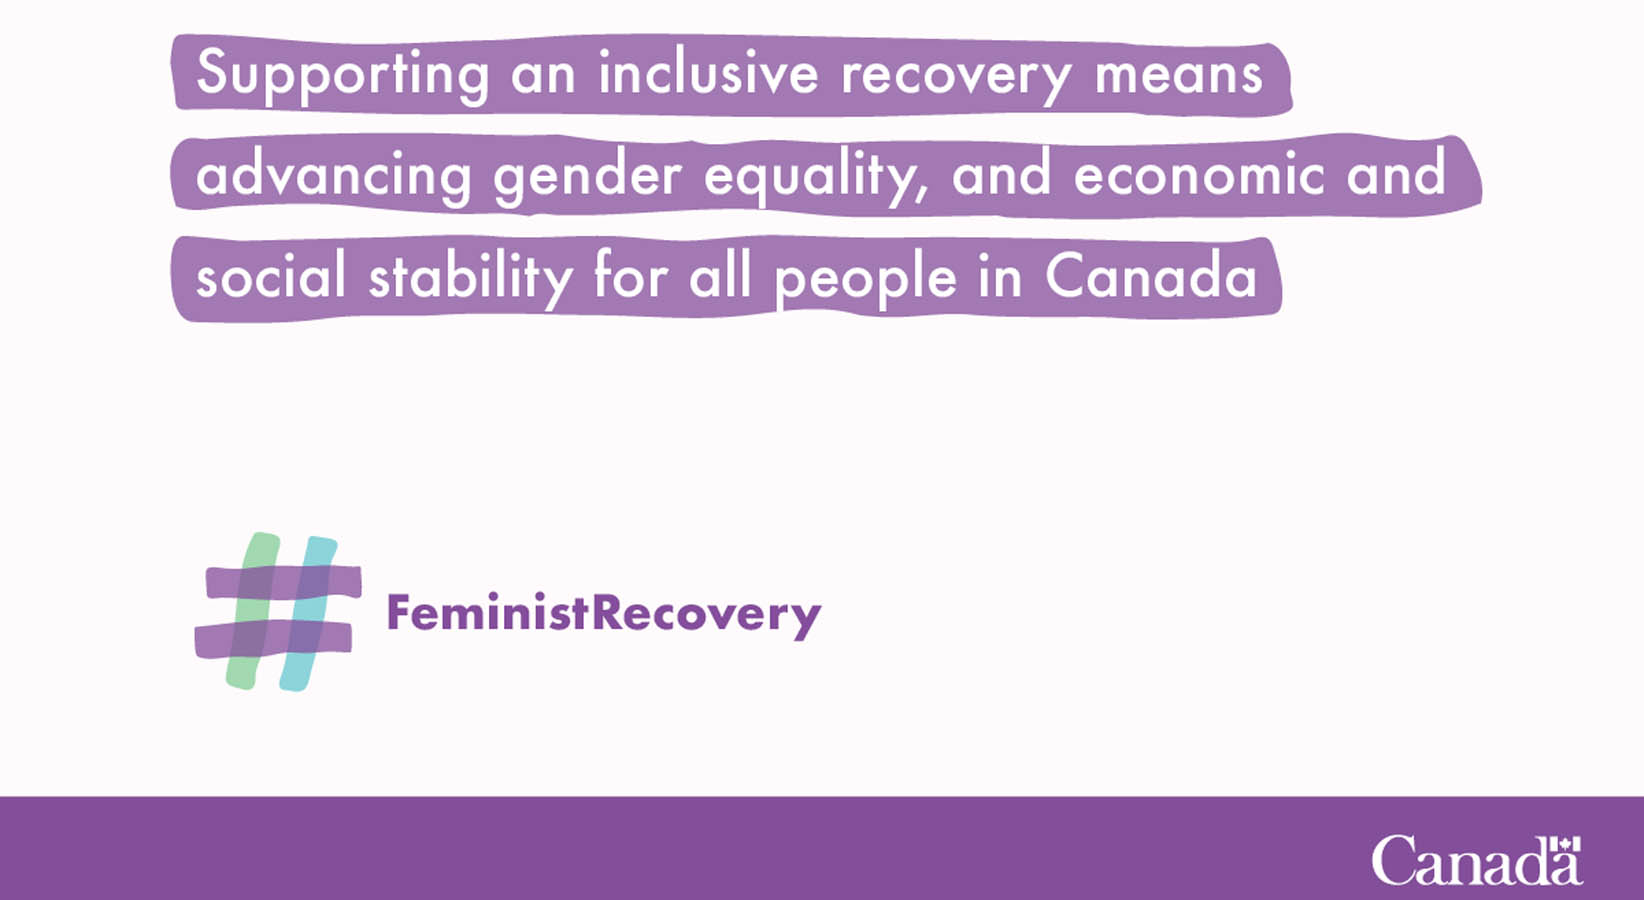 Theme image of the 2021 International Women’s Day with the quote “Supporting an inclusive recovery means advancing gender equality, and ensuring economic and social stability for all people in Canada” and hashtag “#FeministRecovery”. The Canada wordmark appears at the bottom.